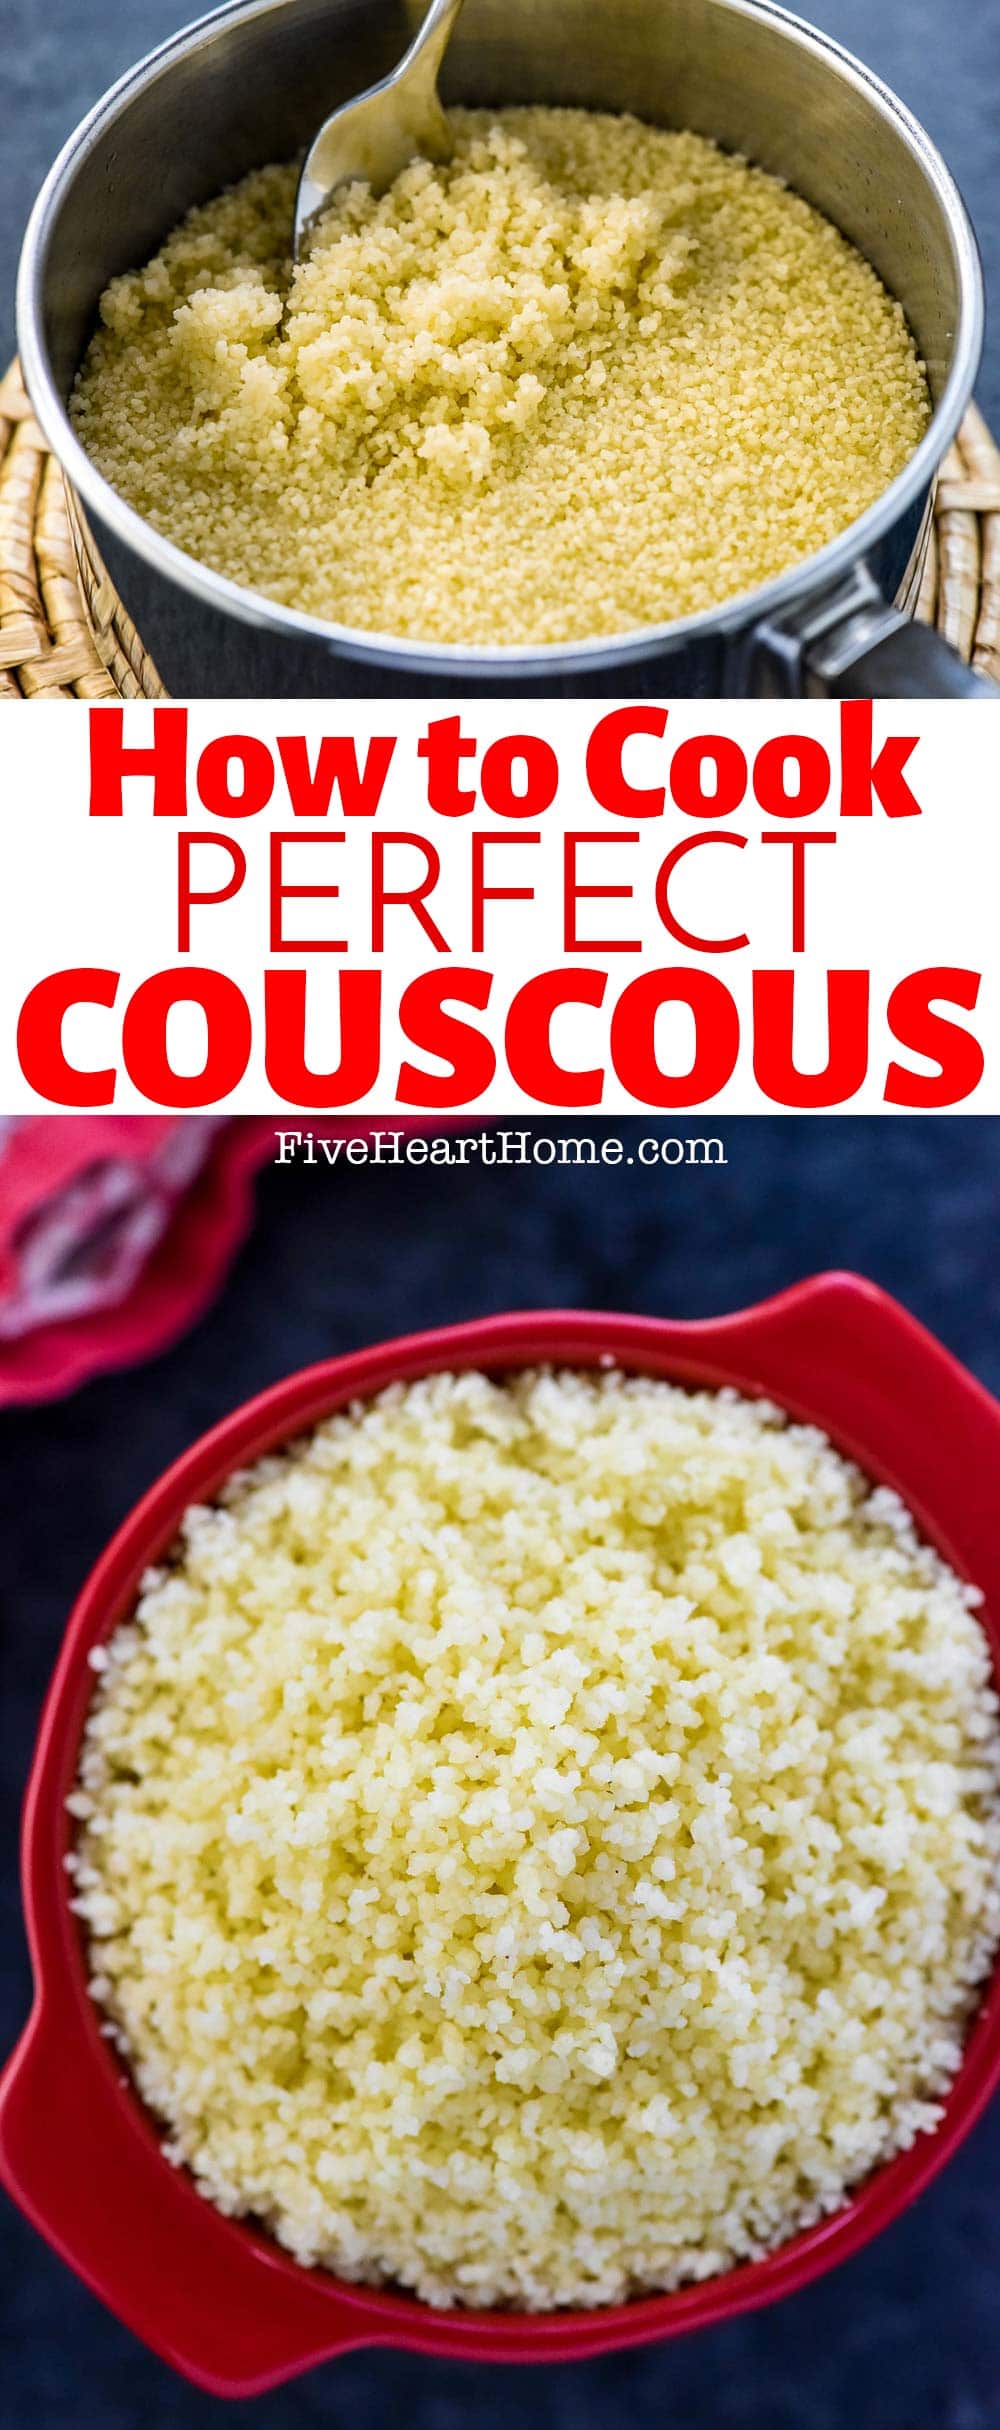 How to Cook Couscous ~ it’s surprisingly quick and easy to make light, flavorful, fluffy couscous with just a few tips, tricks, and simple step-by-step instructions!
 | FiveHeartHome.com via @fivehearthome